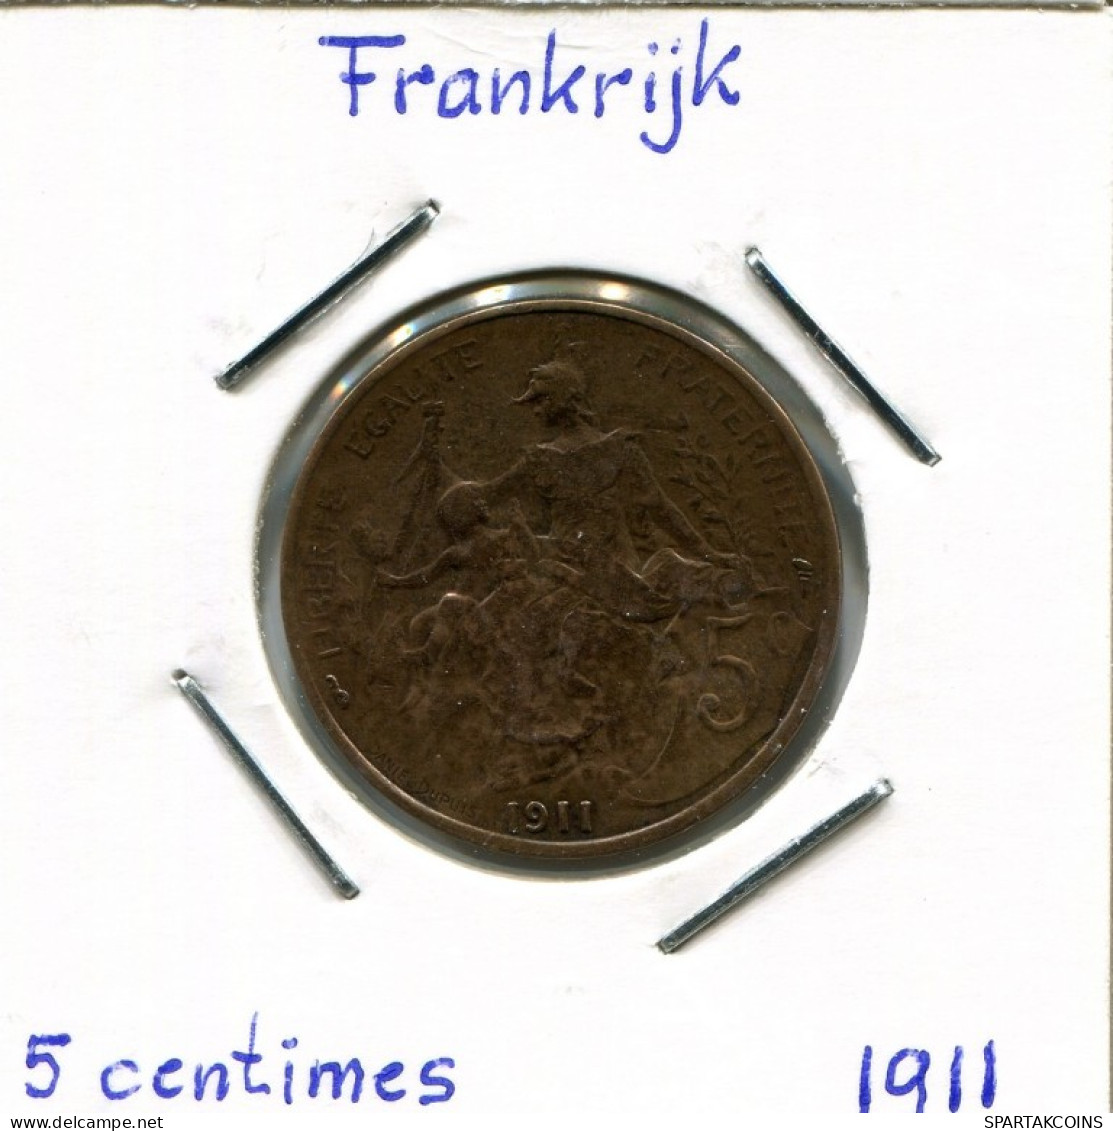 5 CENTIMES 1911 FRANCE French Coin #AM010.U.A - 5 Centimes